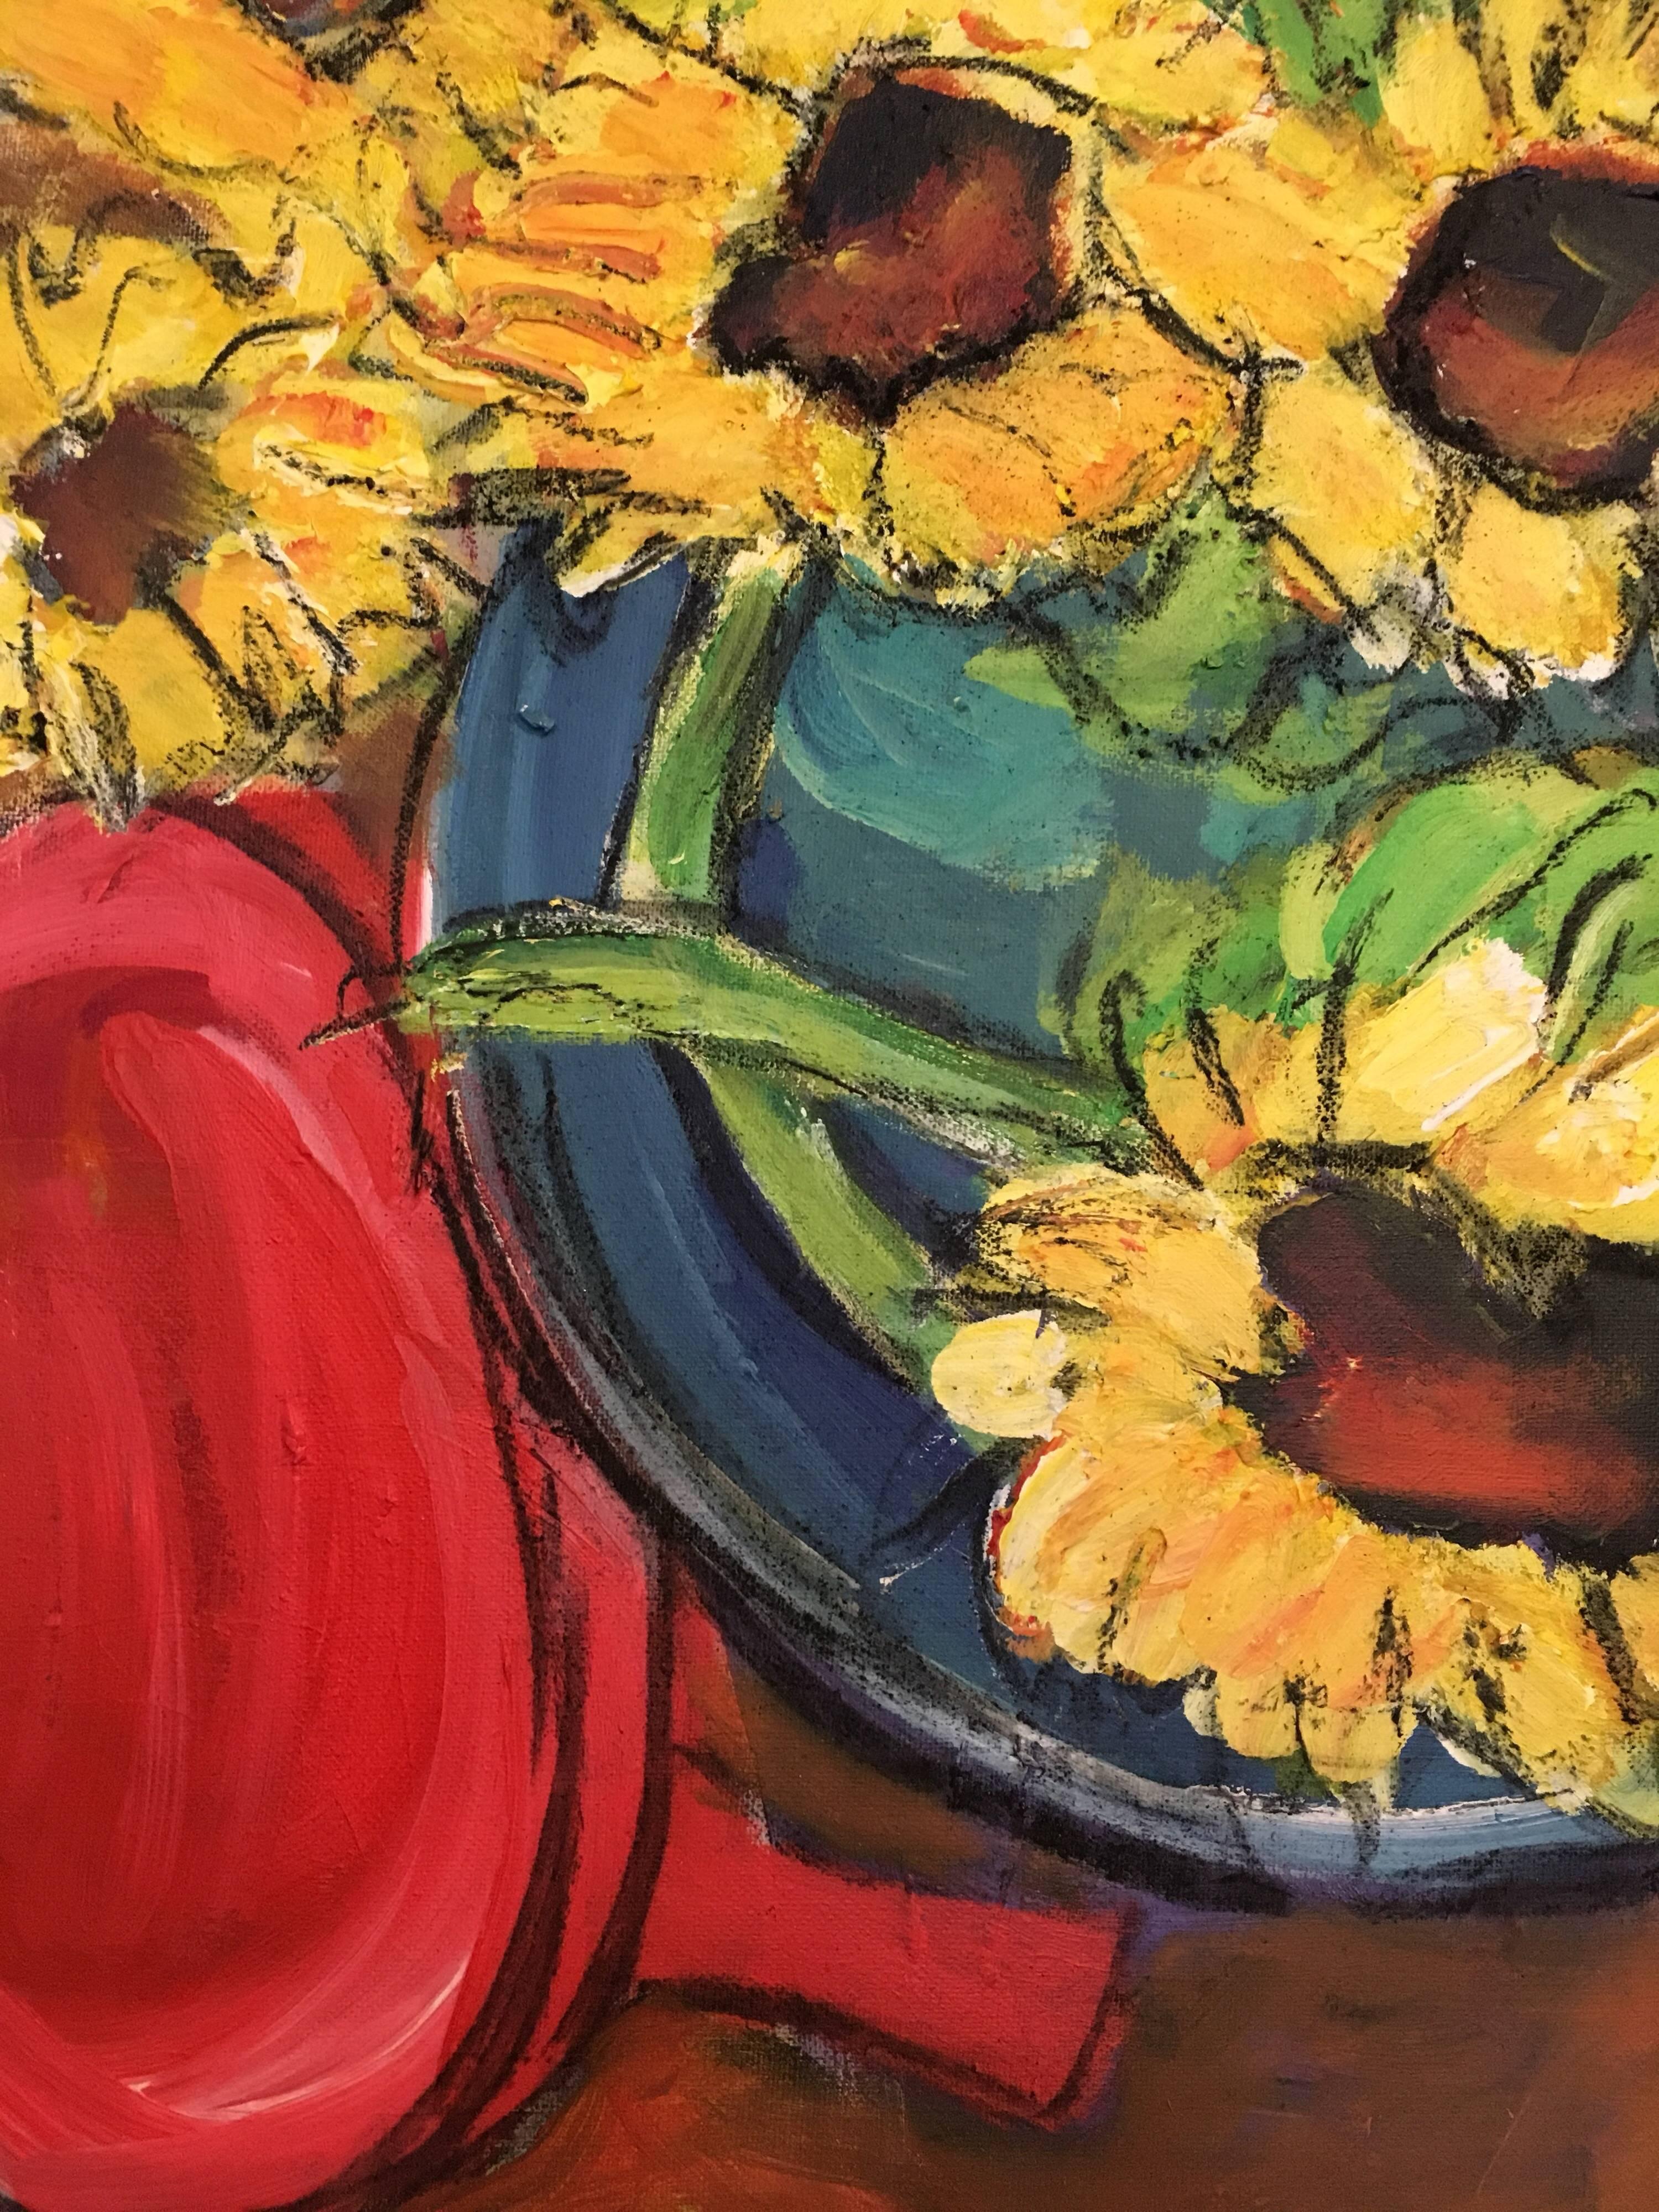 Sunflowers Close Up, Still Life, Oil Painting
by Pamela Cawley, British 20th century
oil painting on canvas, unframed
canvas: 20 x 16 inches 

Stunning original Impressionist oil painting by the 20th century British artist, Pamela Cawley. The work